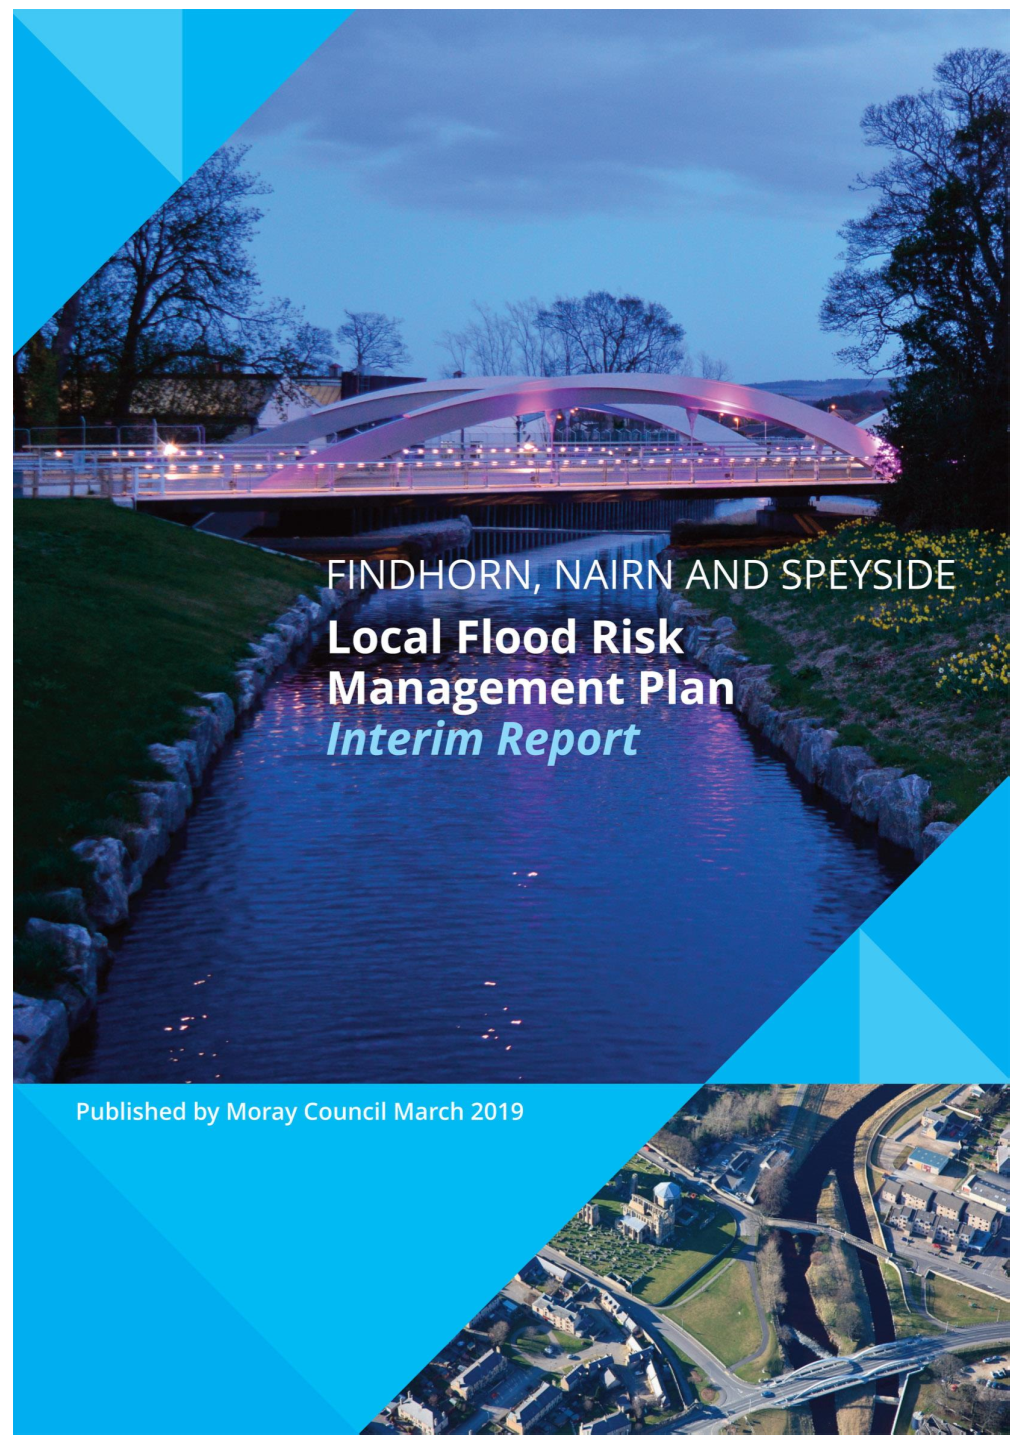 Findhorn, Nairn and Speyside Local Flood Risk Management Plan 2016-2022: Interim Report